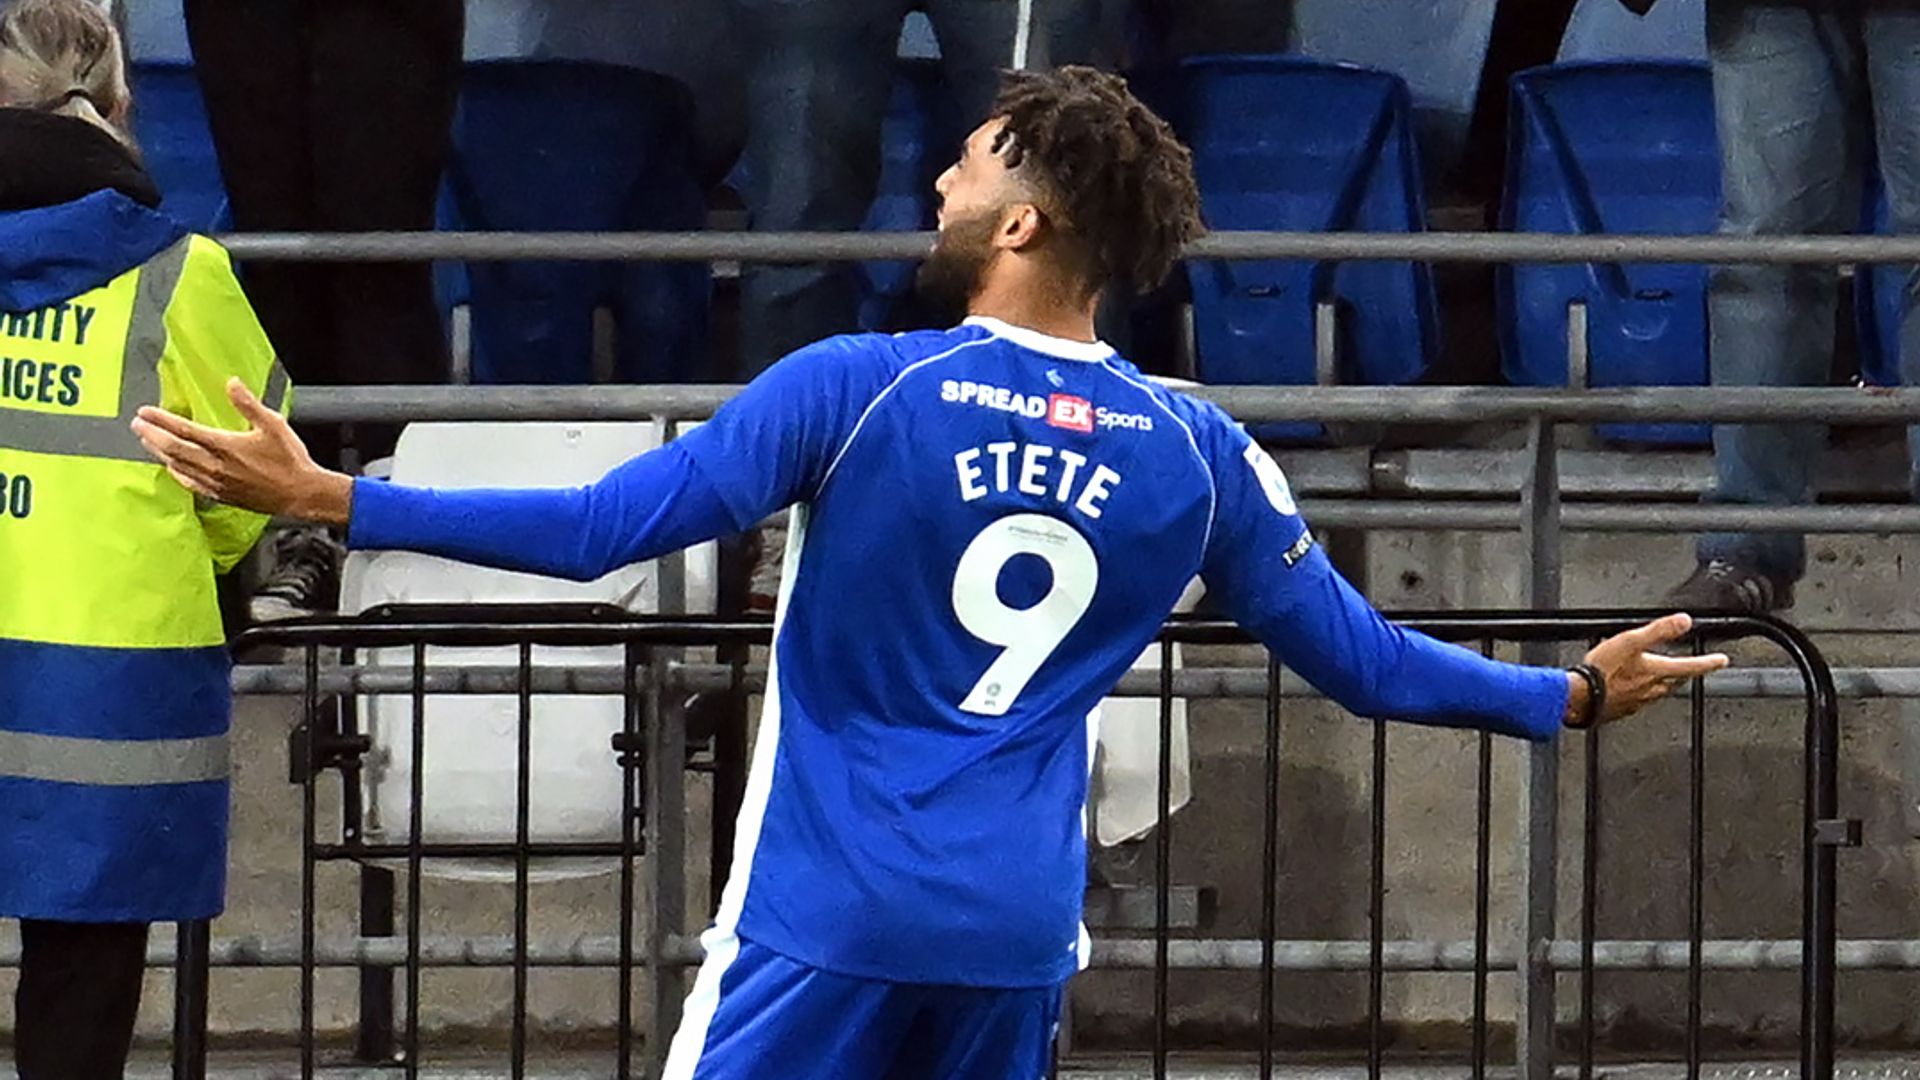 Cardiff ease past Rotherham